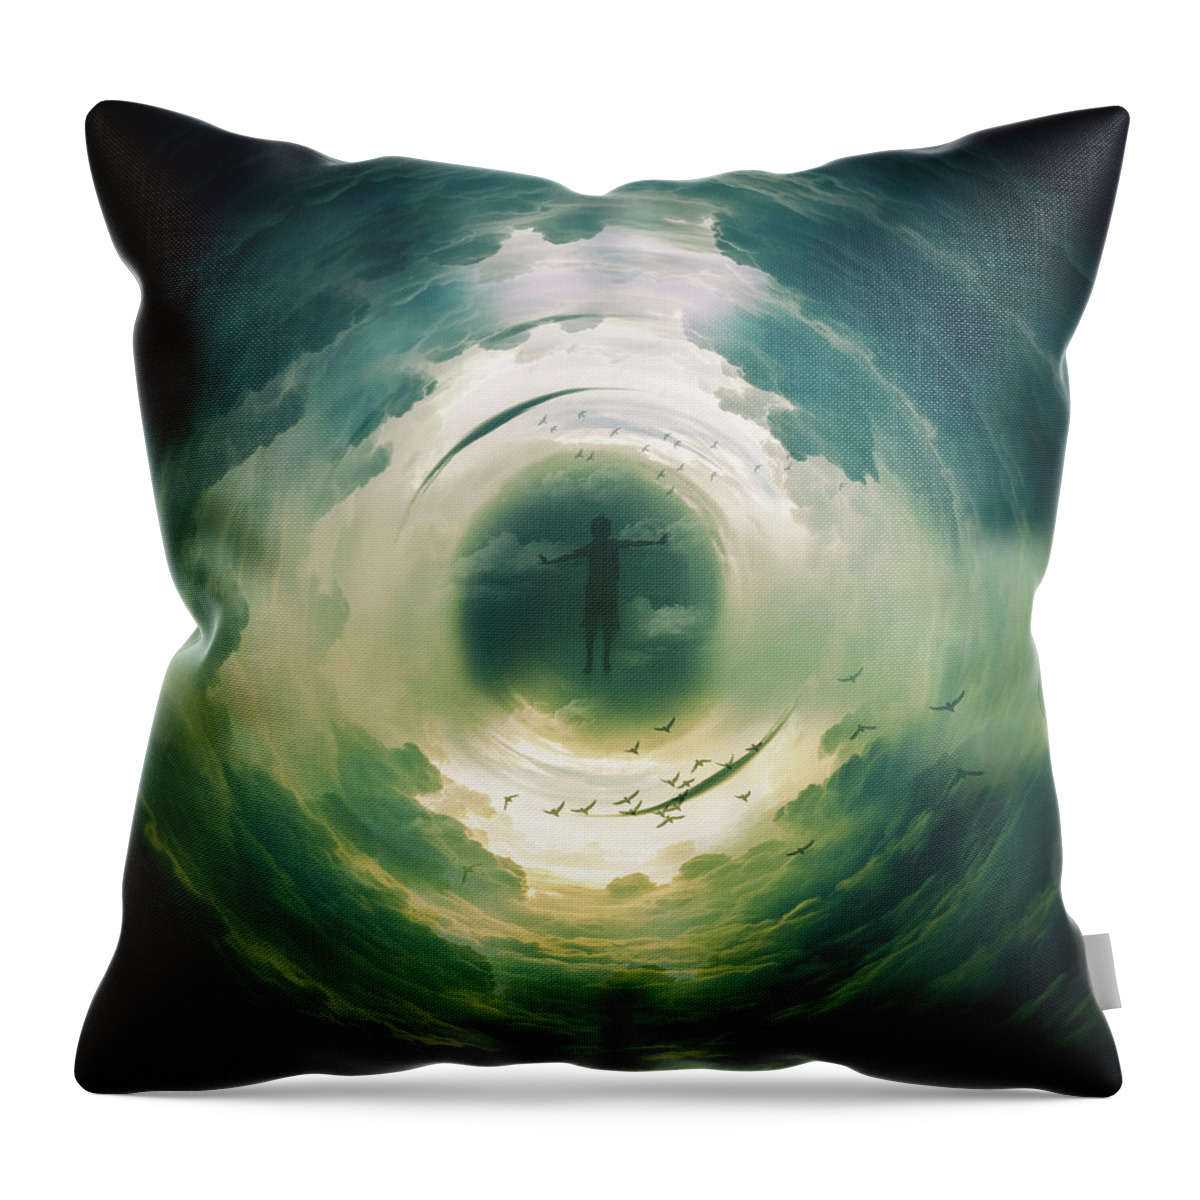 Fantasy Afterlife Sky Clouds Dream Surreal Throw Pillow featuring the digital art Passing Through by Katherine Smit